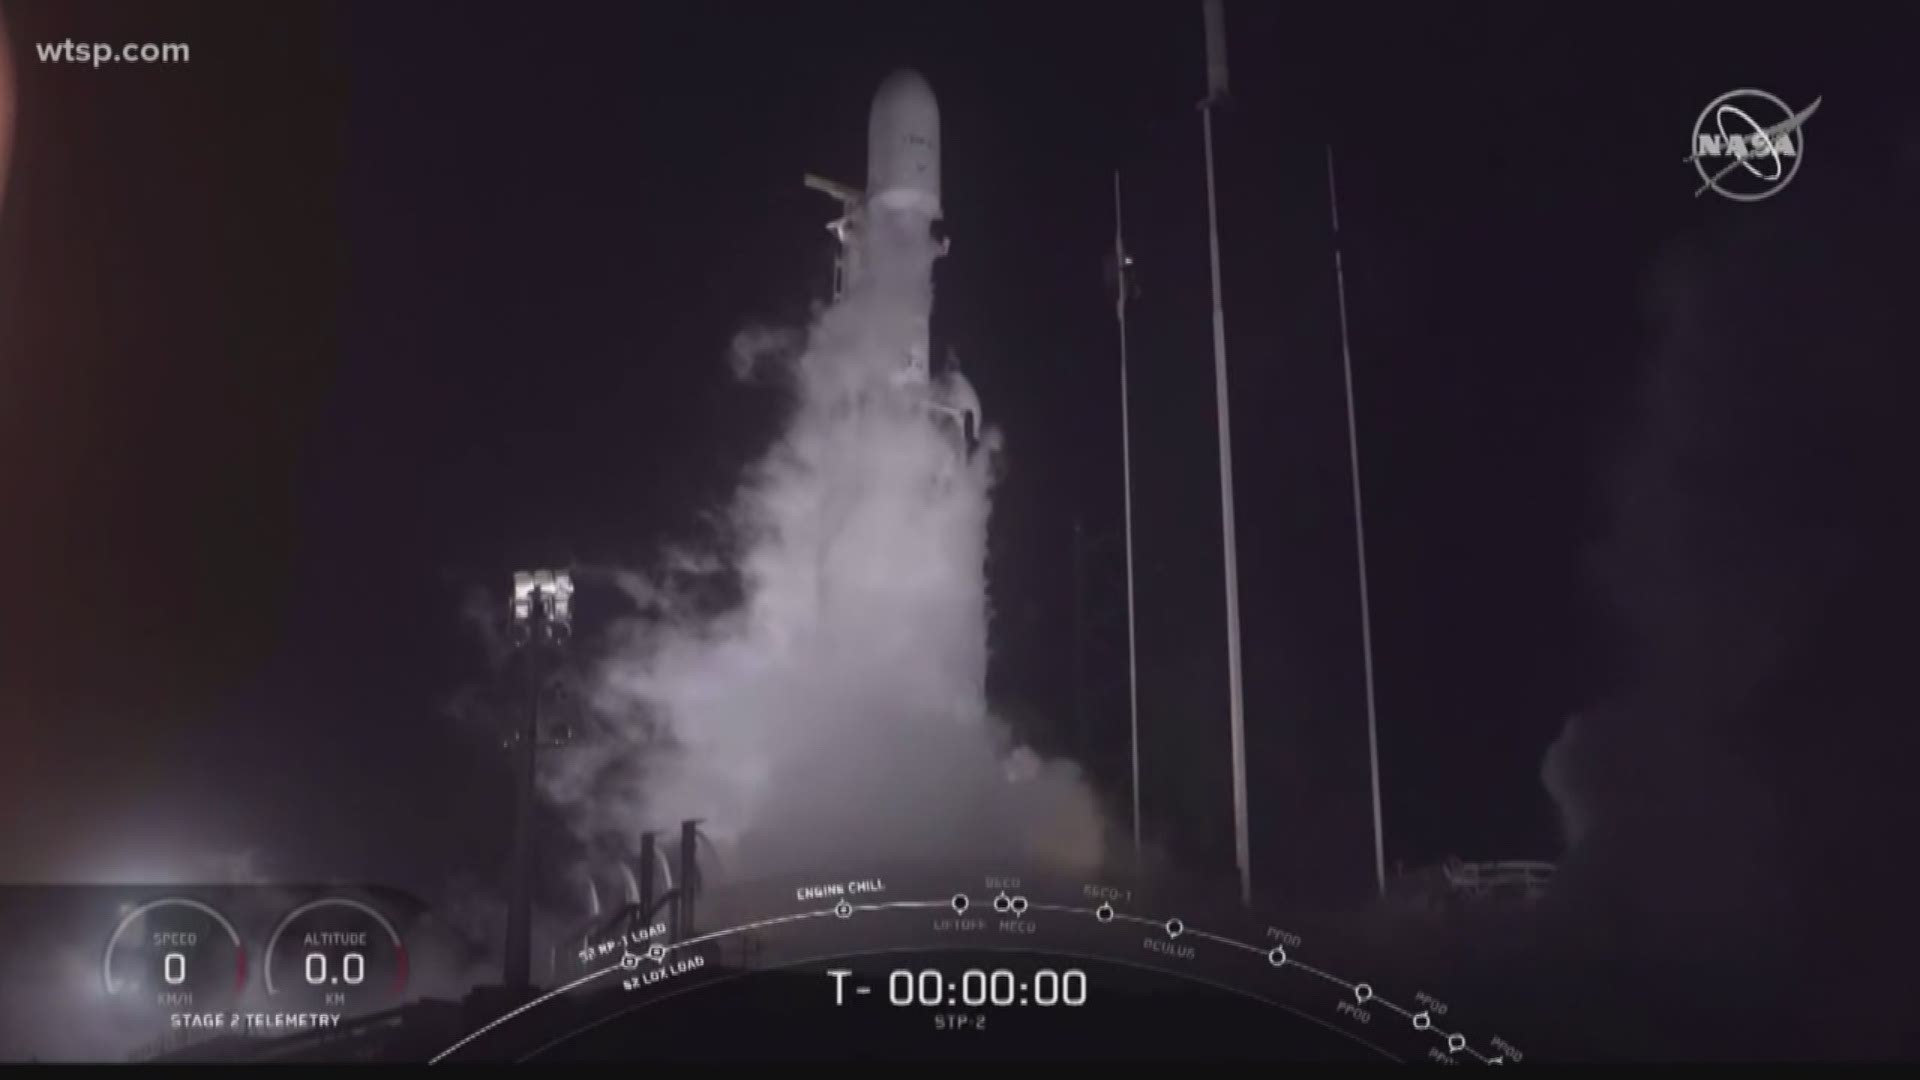 The launch marked the first time SpaceX reused side boosters from a previous Falcon Heavy mission. https://on.wtsp.com/2Y9SMwc